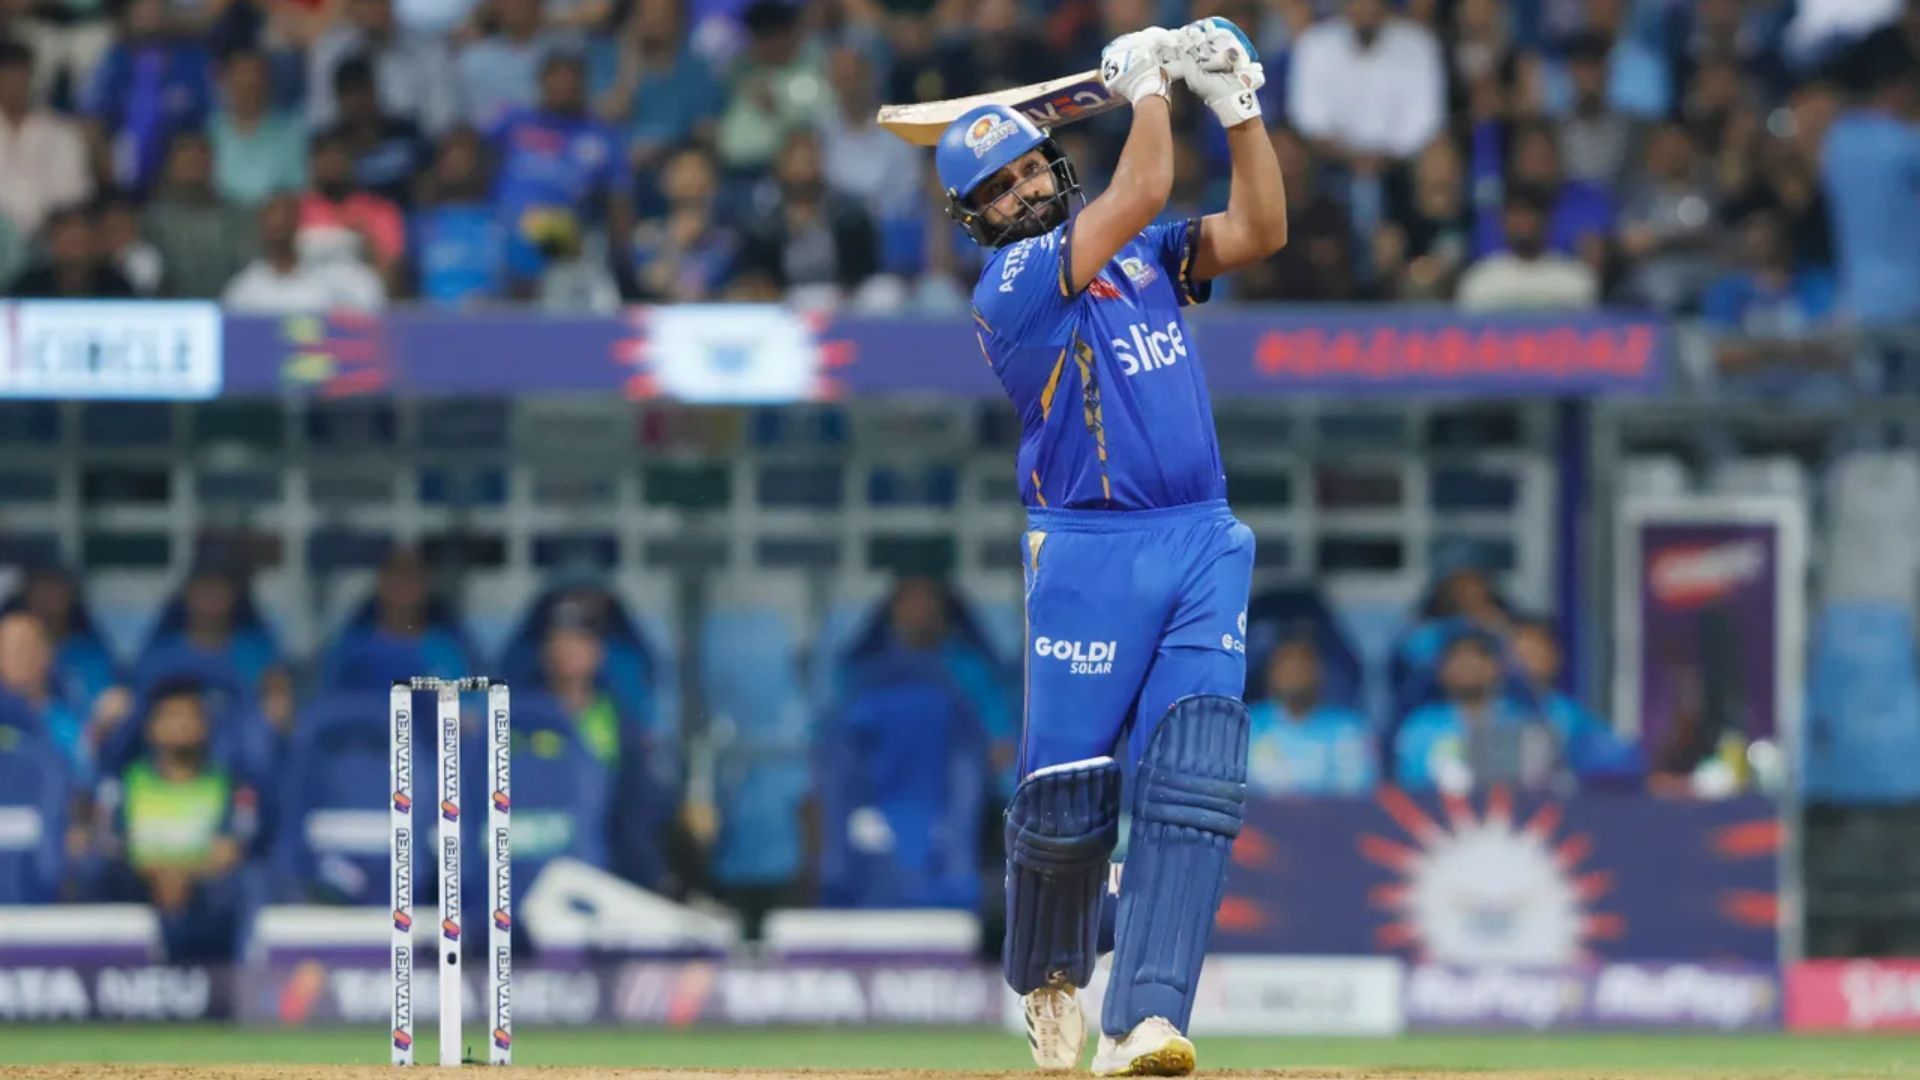 Rohit Sharma entertained the emotional Wankhede crowd